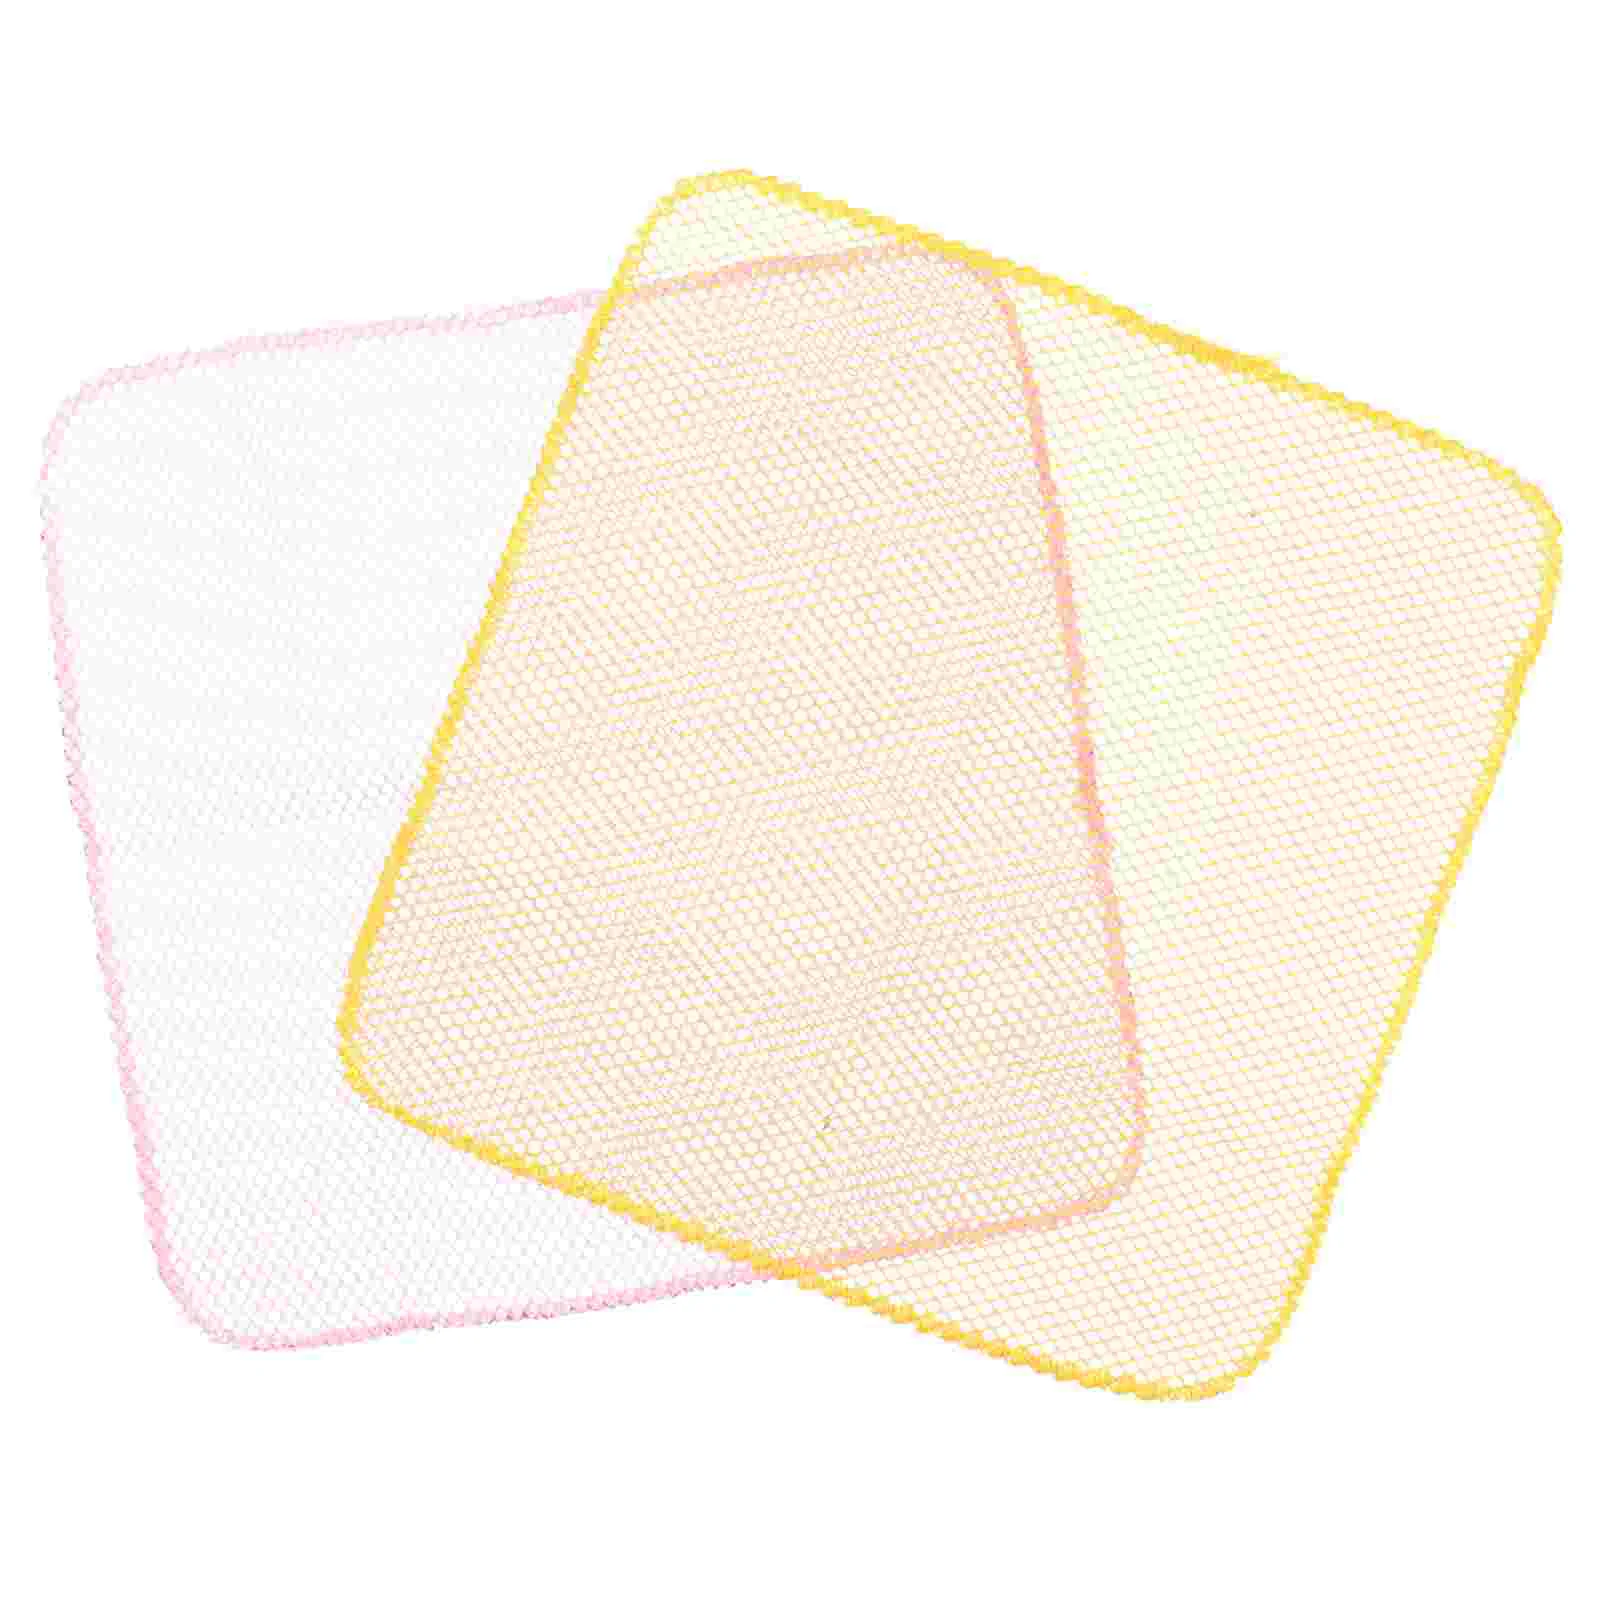 

Dish Cloth Washing Kitchen Cloths Towel Dishes Cleaning Net Mesh Scrubber Rag Hand Bowl Drying Fast Sponges Dry Odortowels Oil